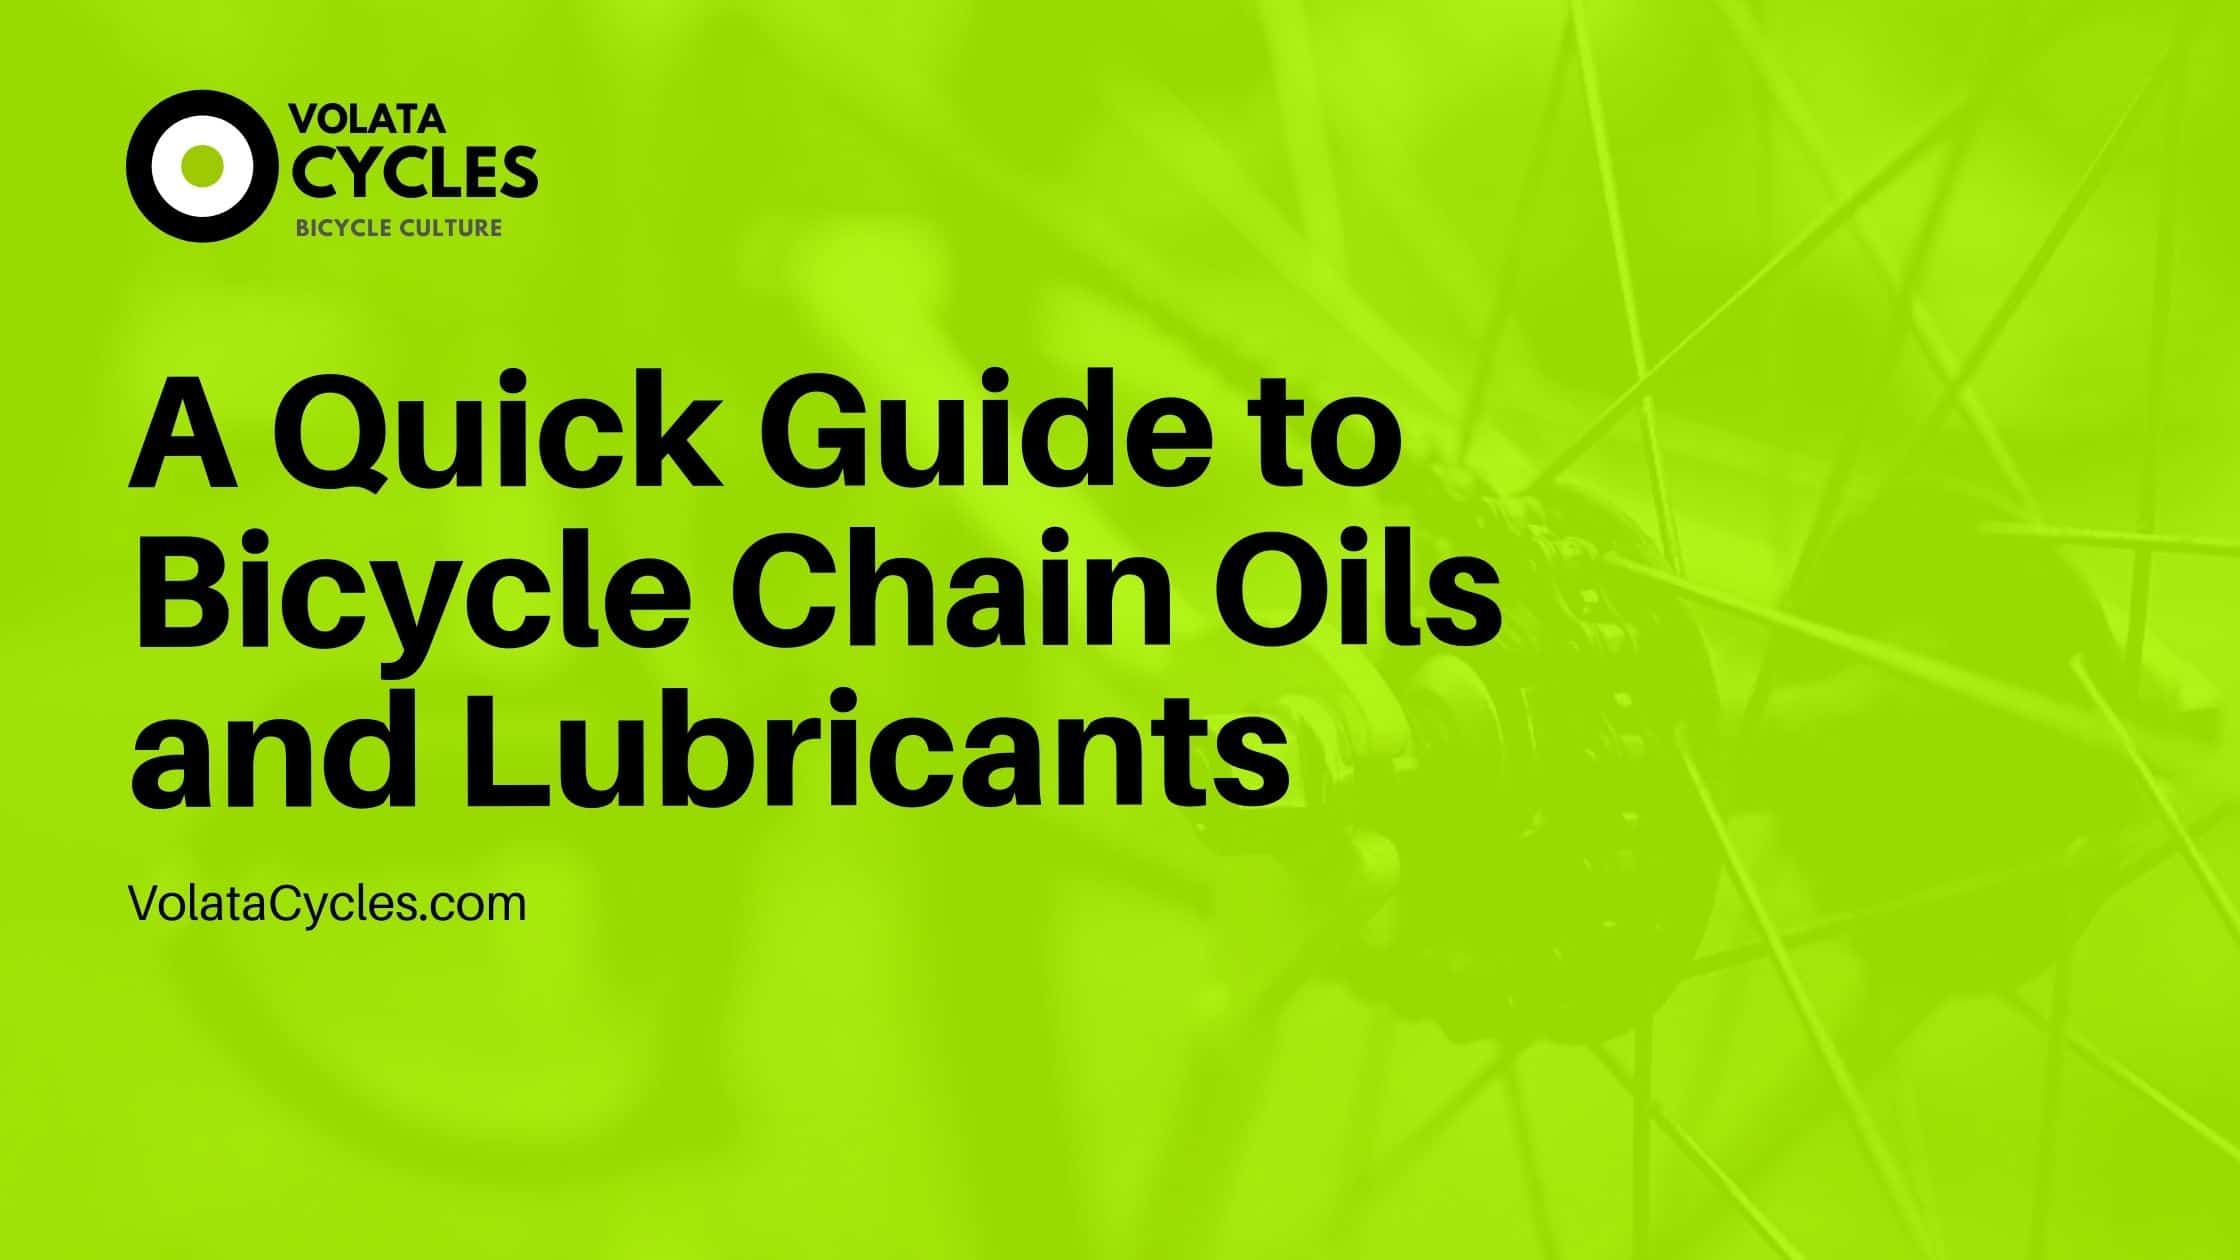 A-Quick-Guide-to-Bicycle-Chain-Oils-and-Lubricants